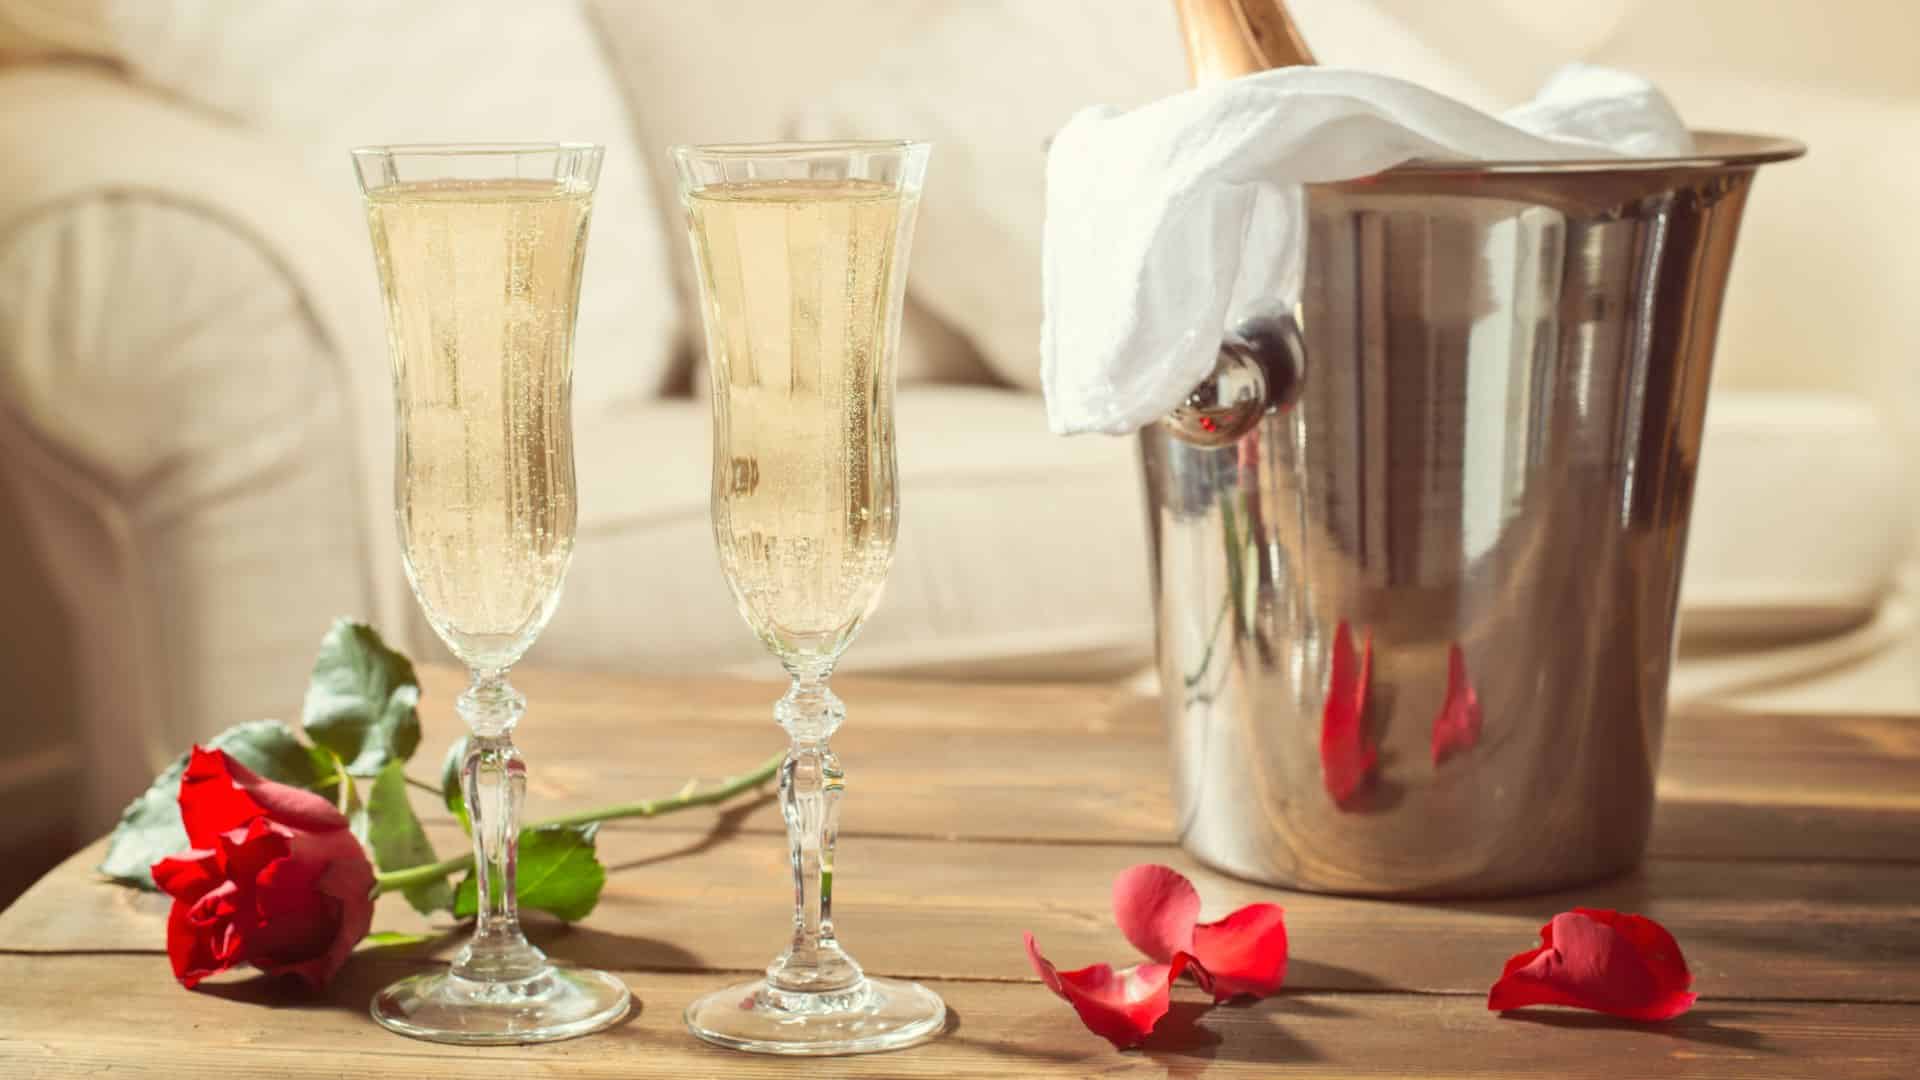 Two glasses full of Champagne next to a red rose and wine bucket on a wooden table